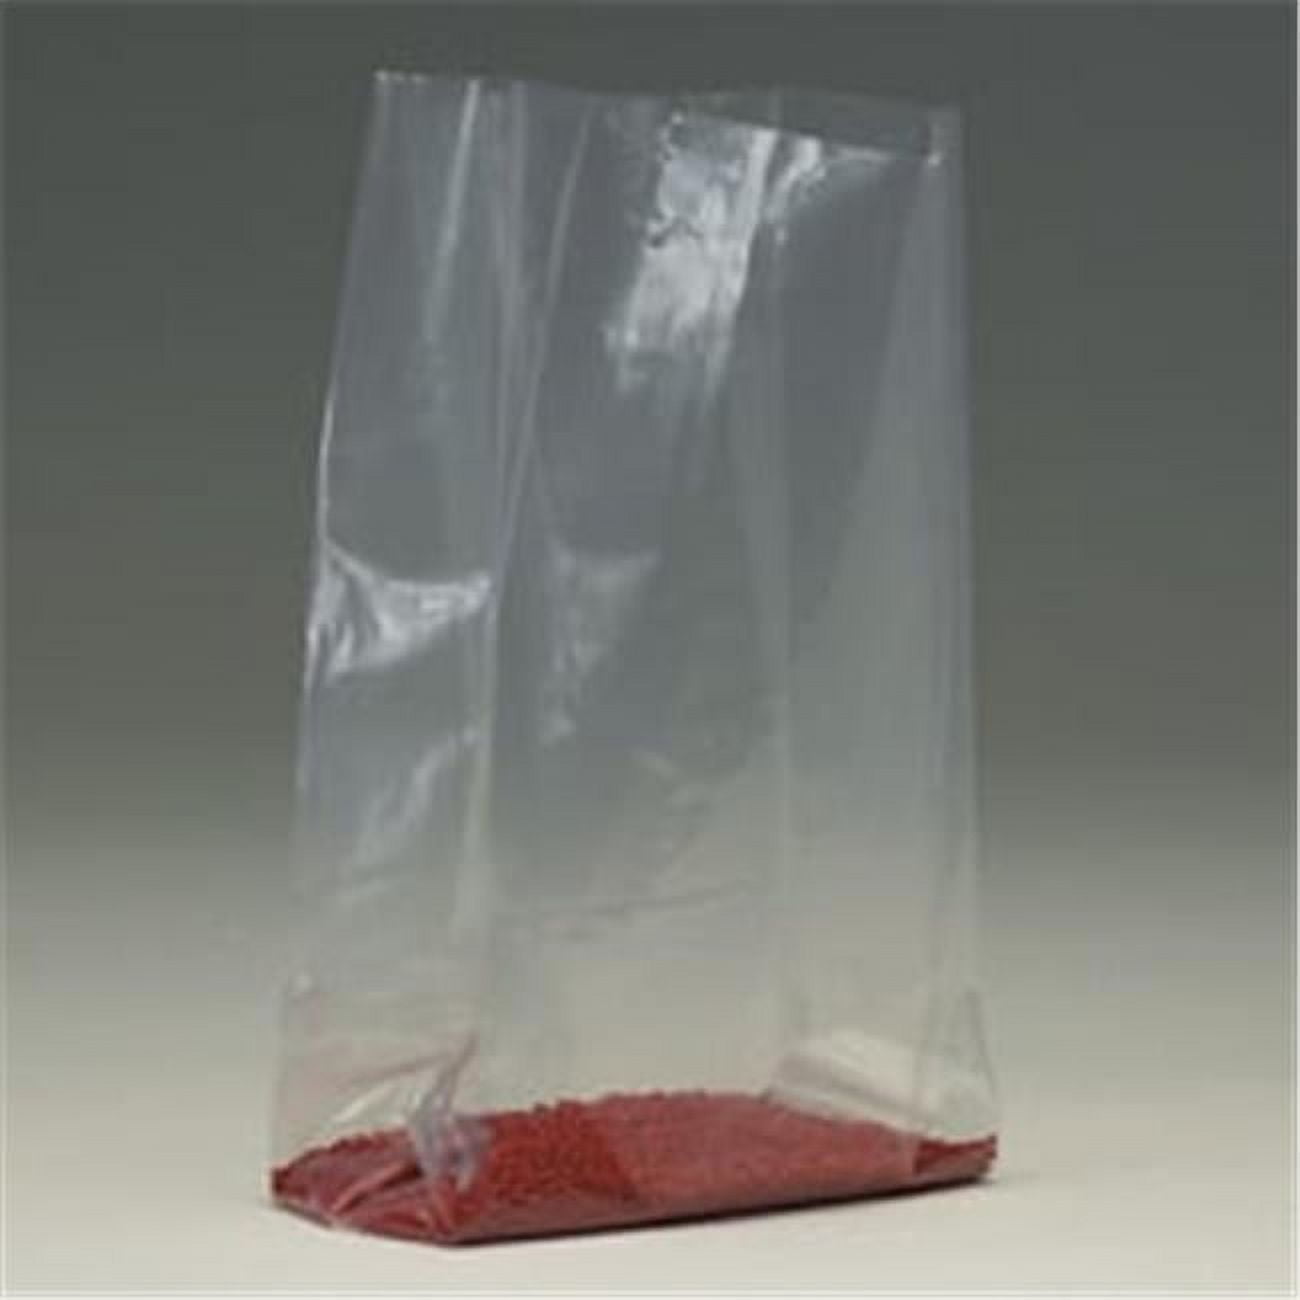 20 x 24 Poly Bag with Single Drawstring + 4 Bottom Gusset - Clear (2  mil) - GBE Packaging Supplies - Wholesale Packaging, Boxes, Mailers,  Bubble, Poly Bags - Product Packaging Supplies